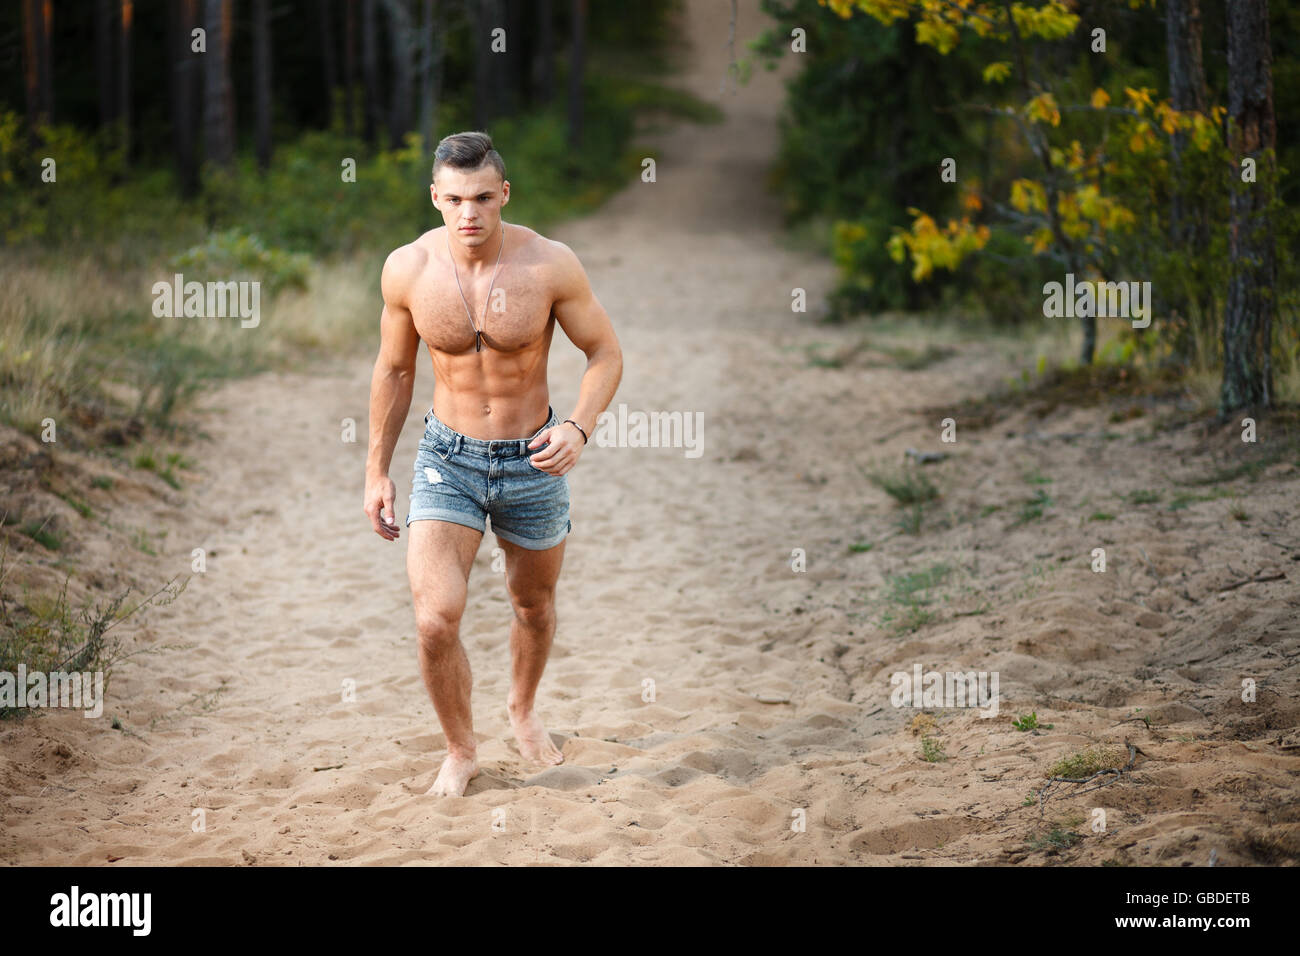 Muscular young man running at forest. Stock Photo